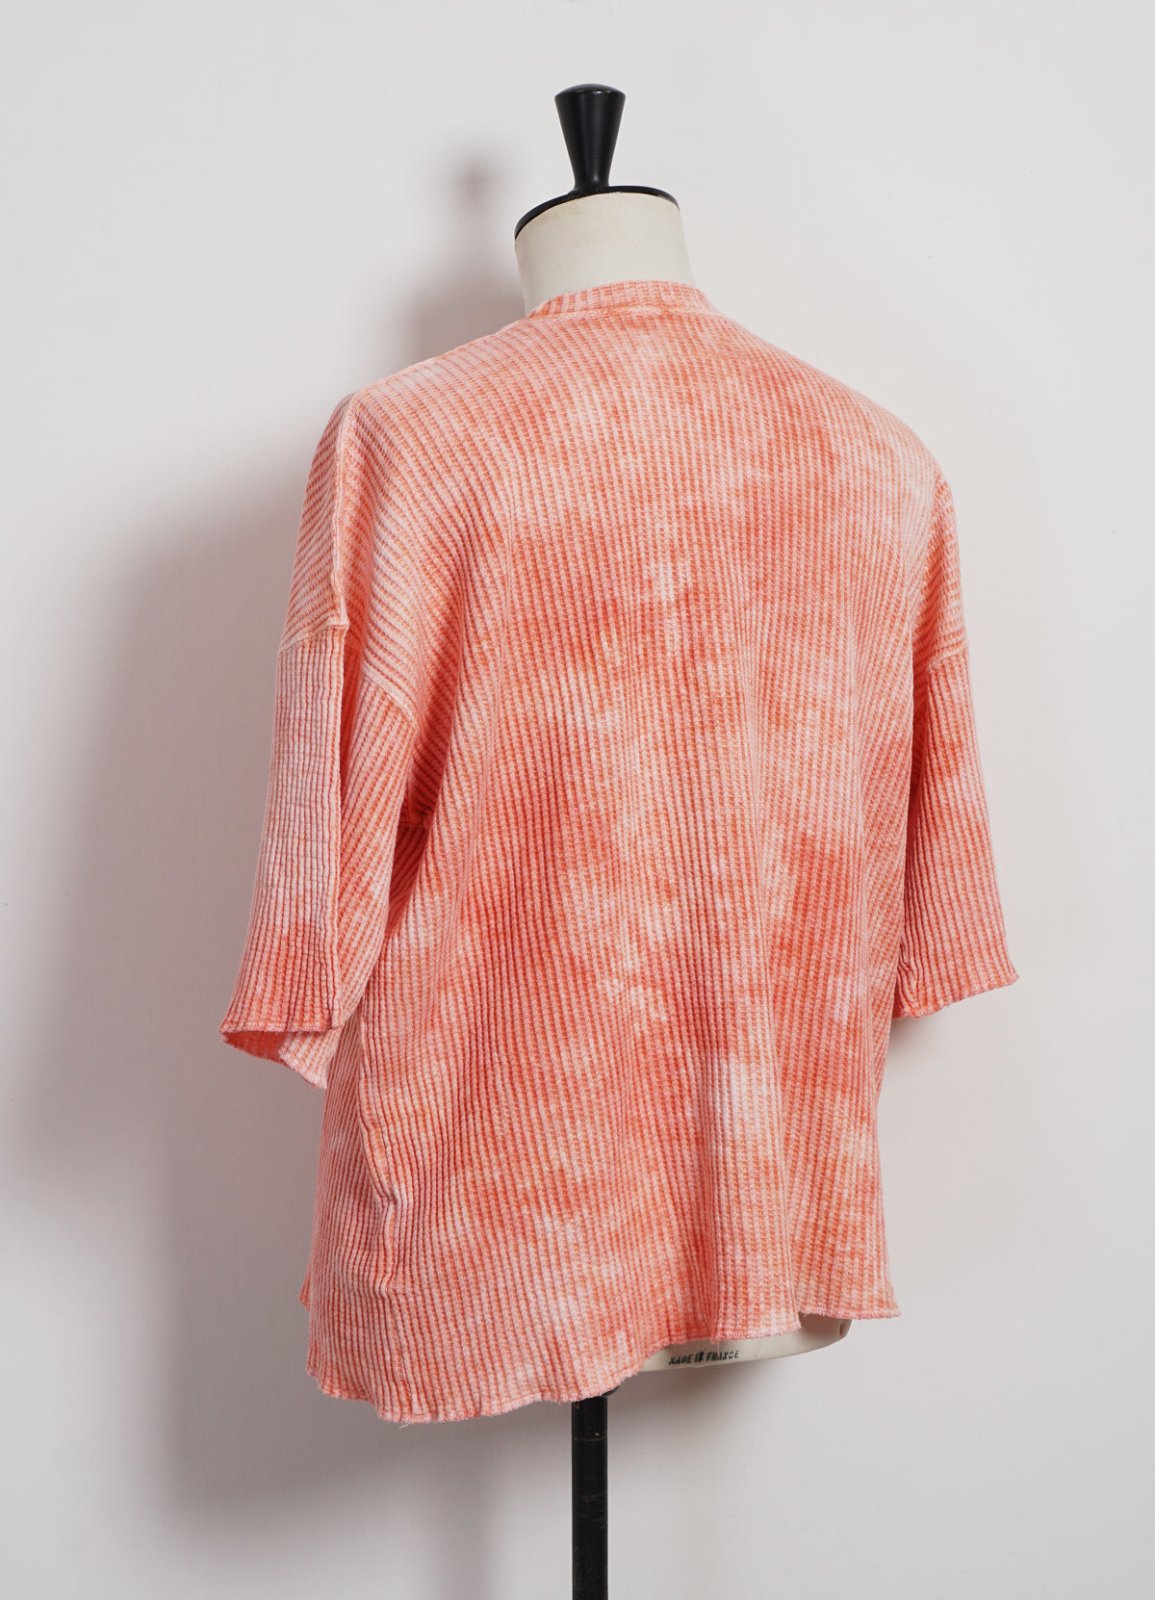 MONITALY - TIE DYE T-SHIRT | Enzyme & Silicon Washed Thermal Crewneck | Pink - HANSEN Garments